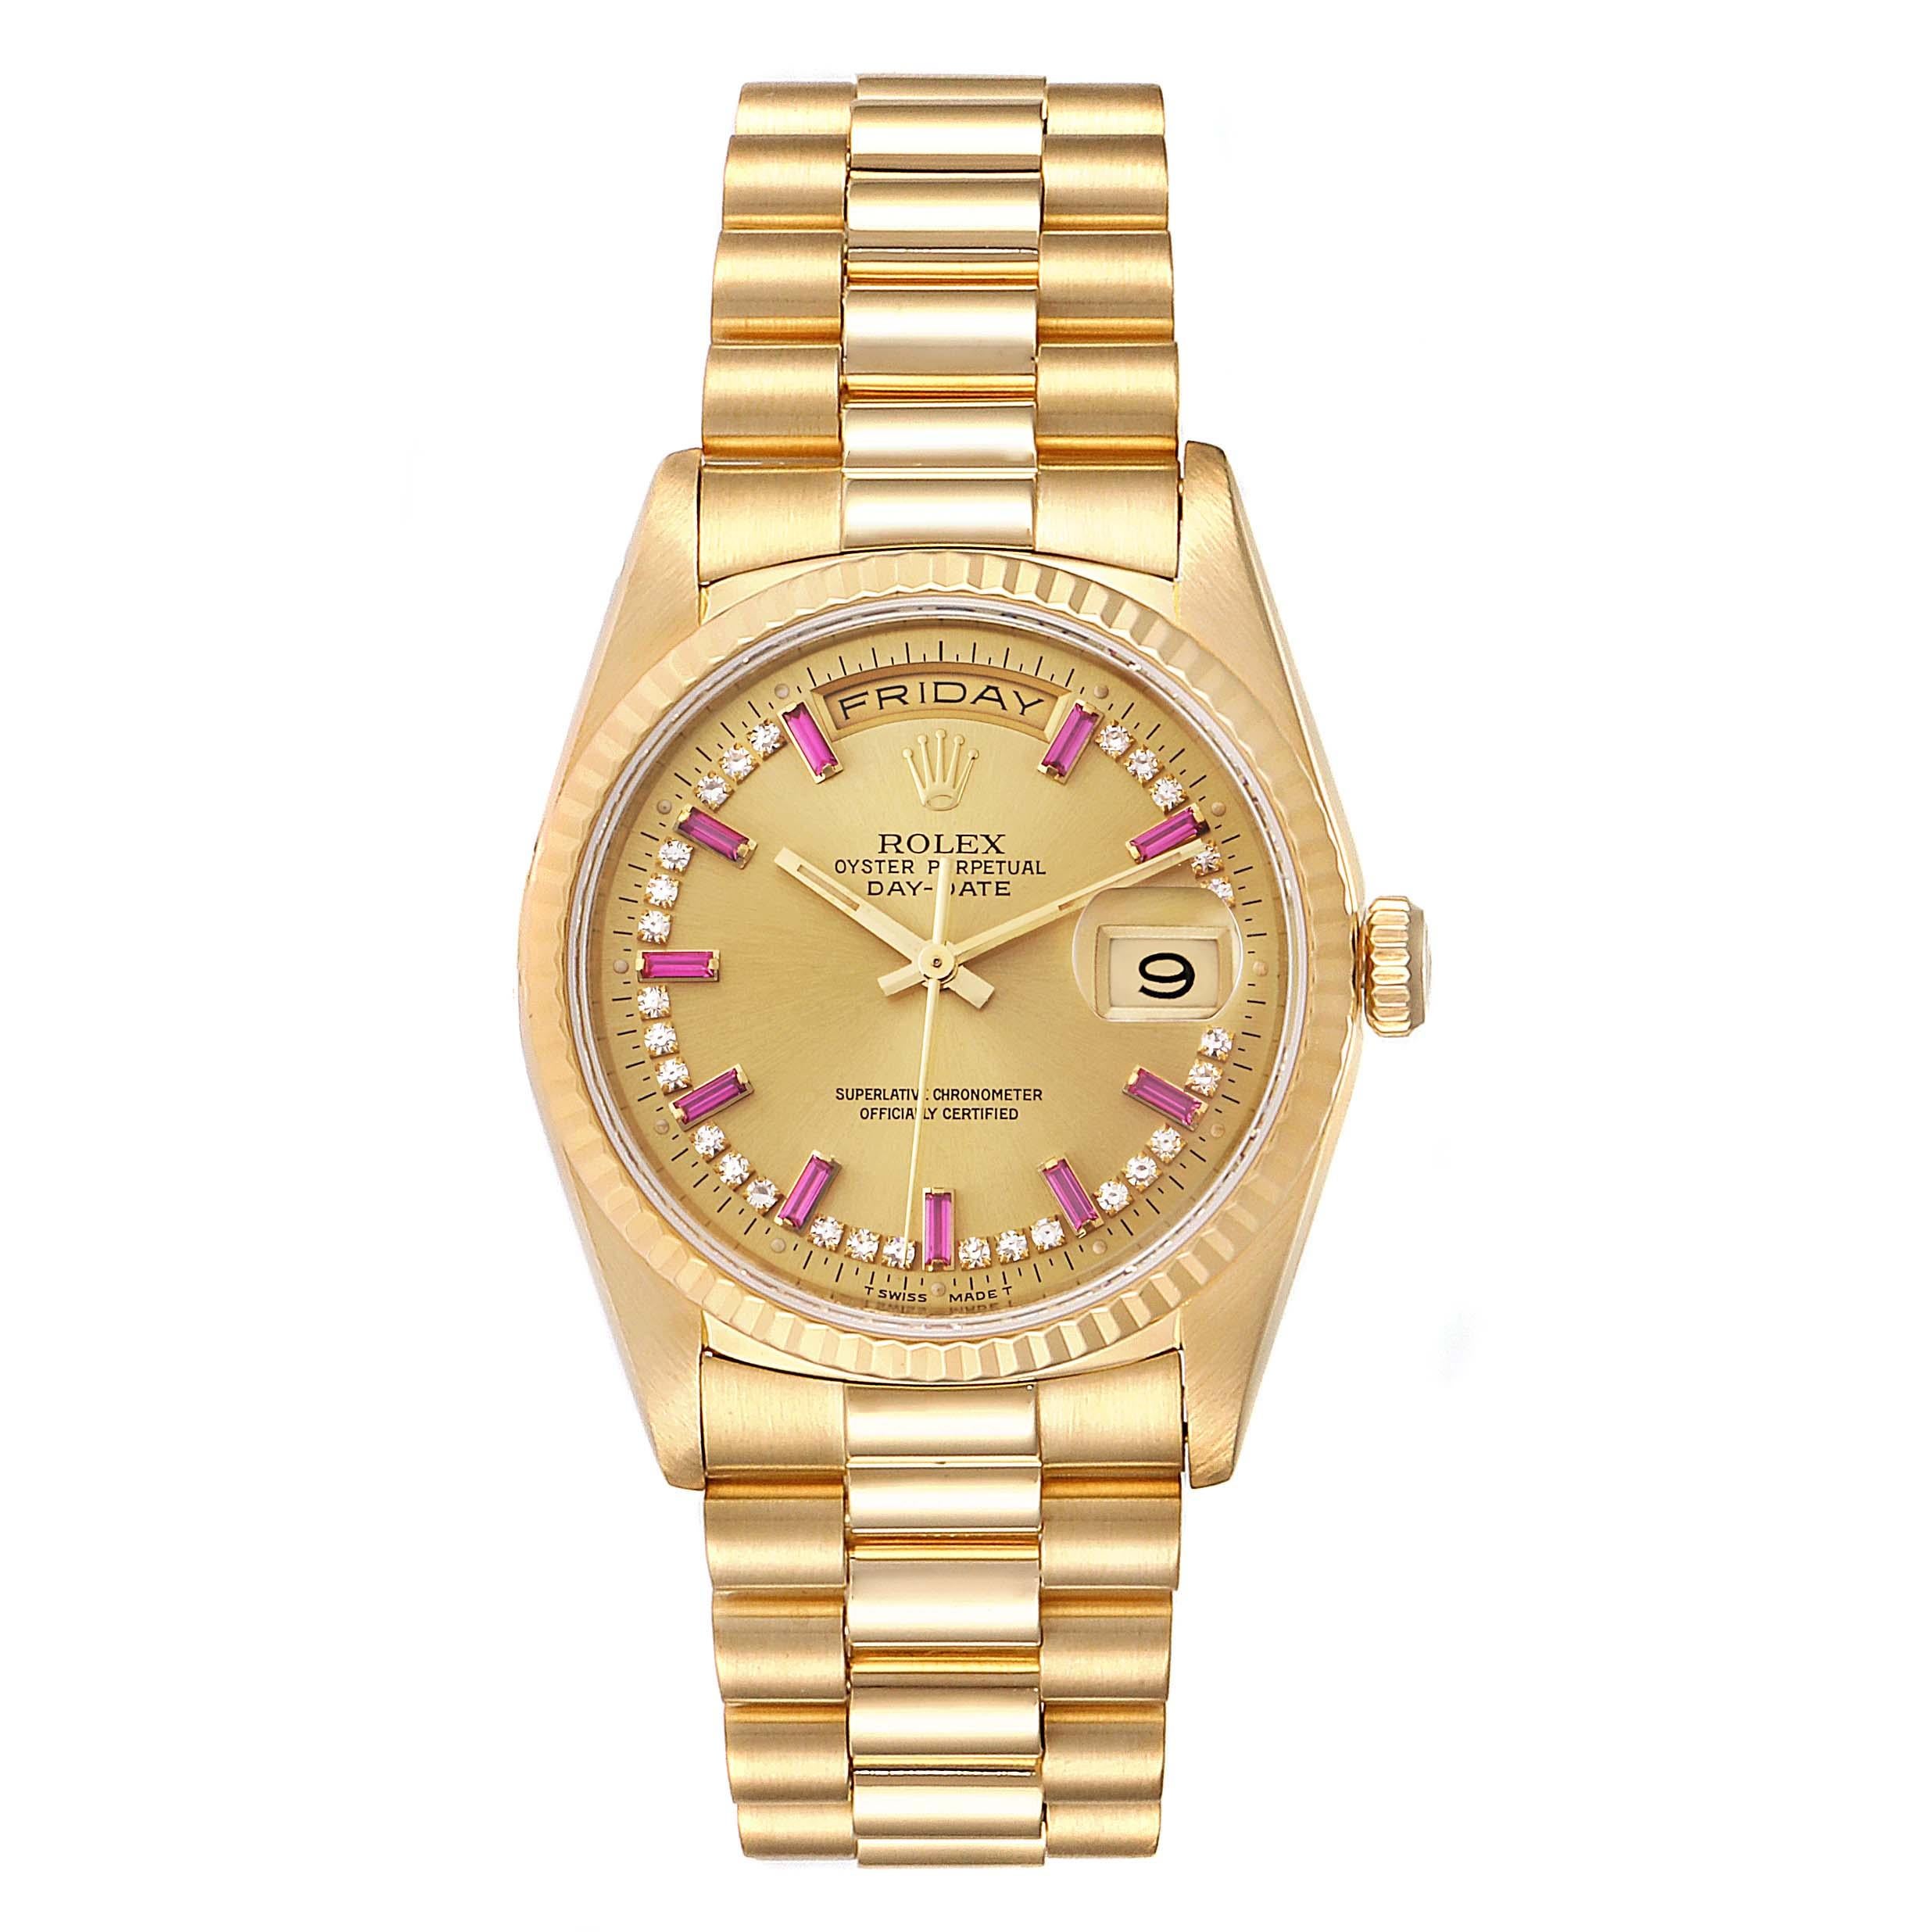 Rolex President Day-Date Yellow Gold String Diamond Ruby Dial Watch 18238. Officially certified chronometer self-winding movement. 18k yellow gold oyster case 36.0 mm in diameter. Rolex logo on a crown. 18K yellow gold fluted bezel. Scratch